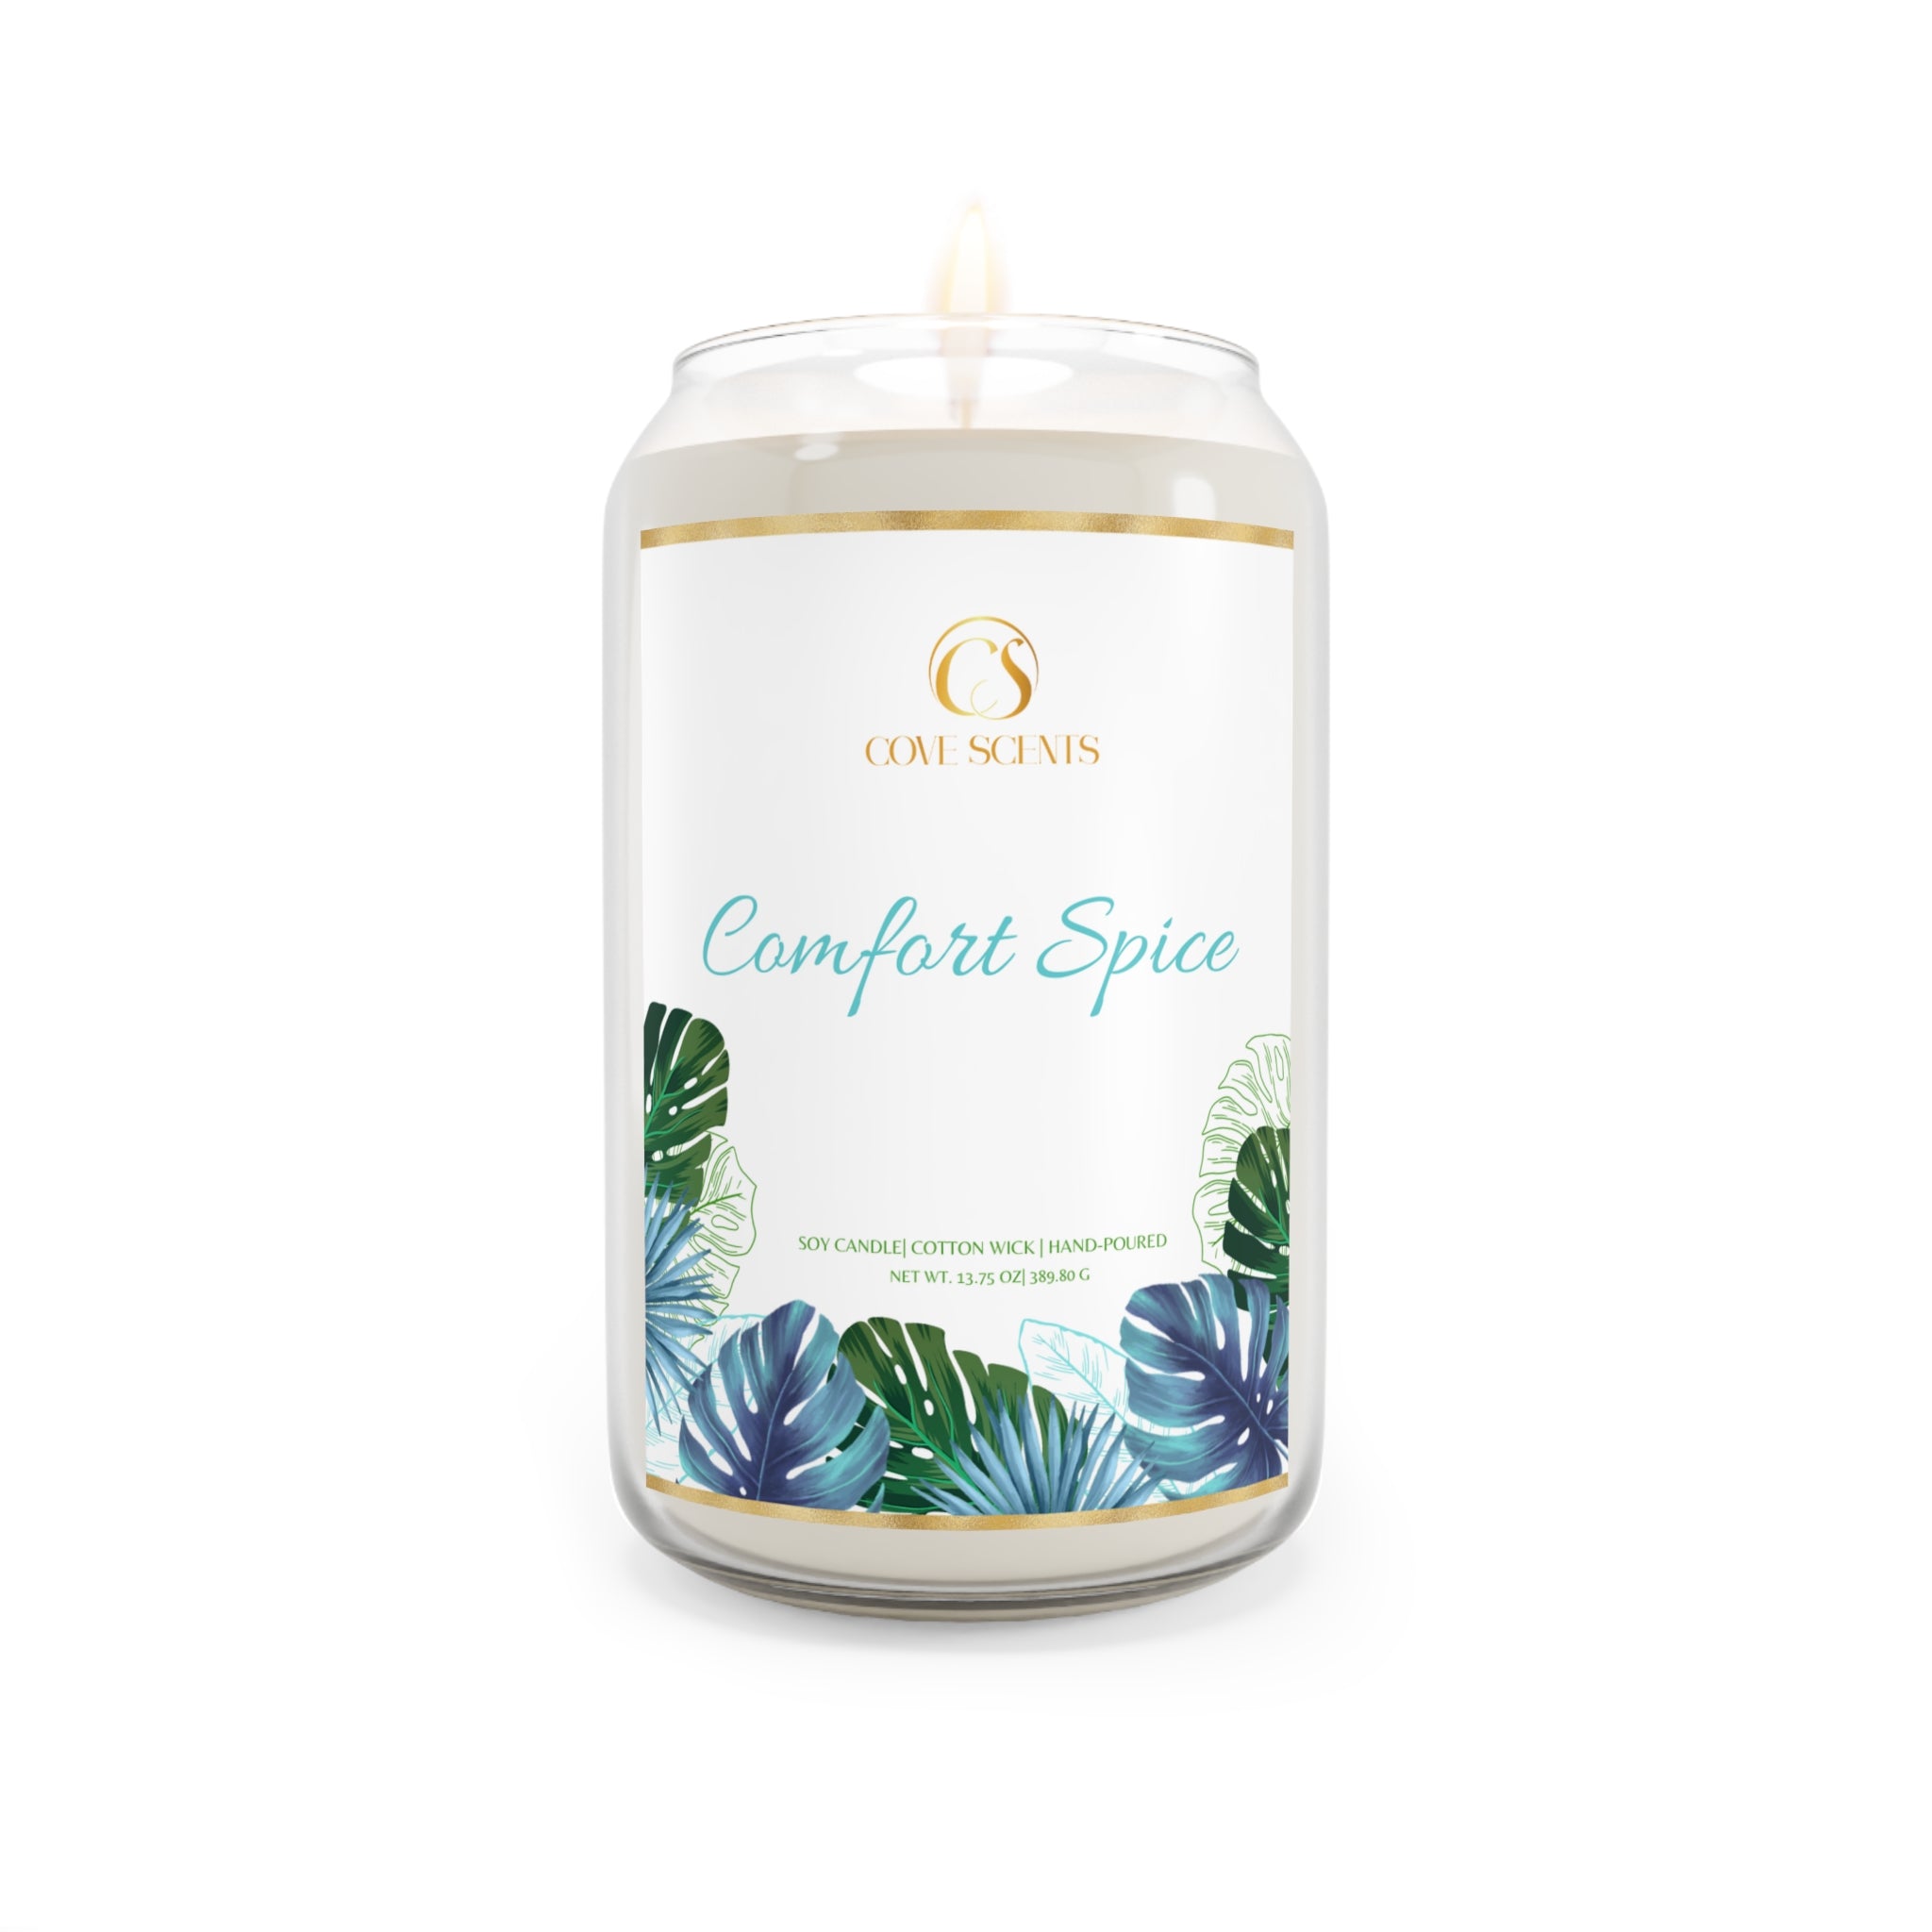 Villa Blvd SOS Candle - Scents of Scents Comfort Spice